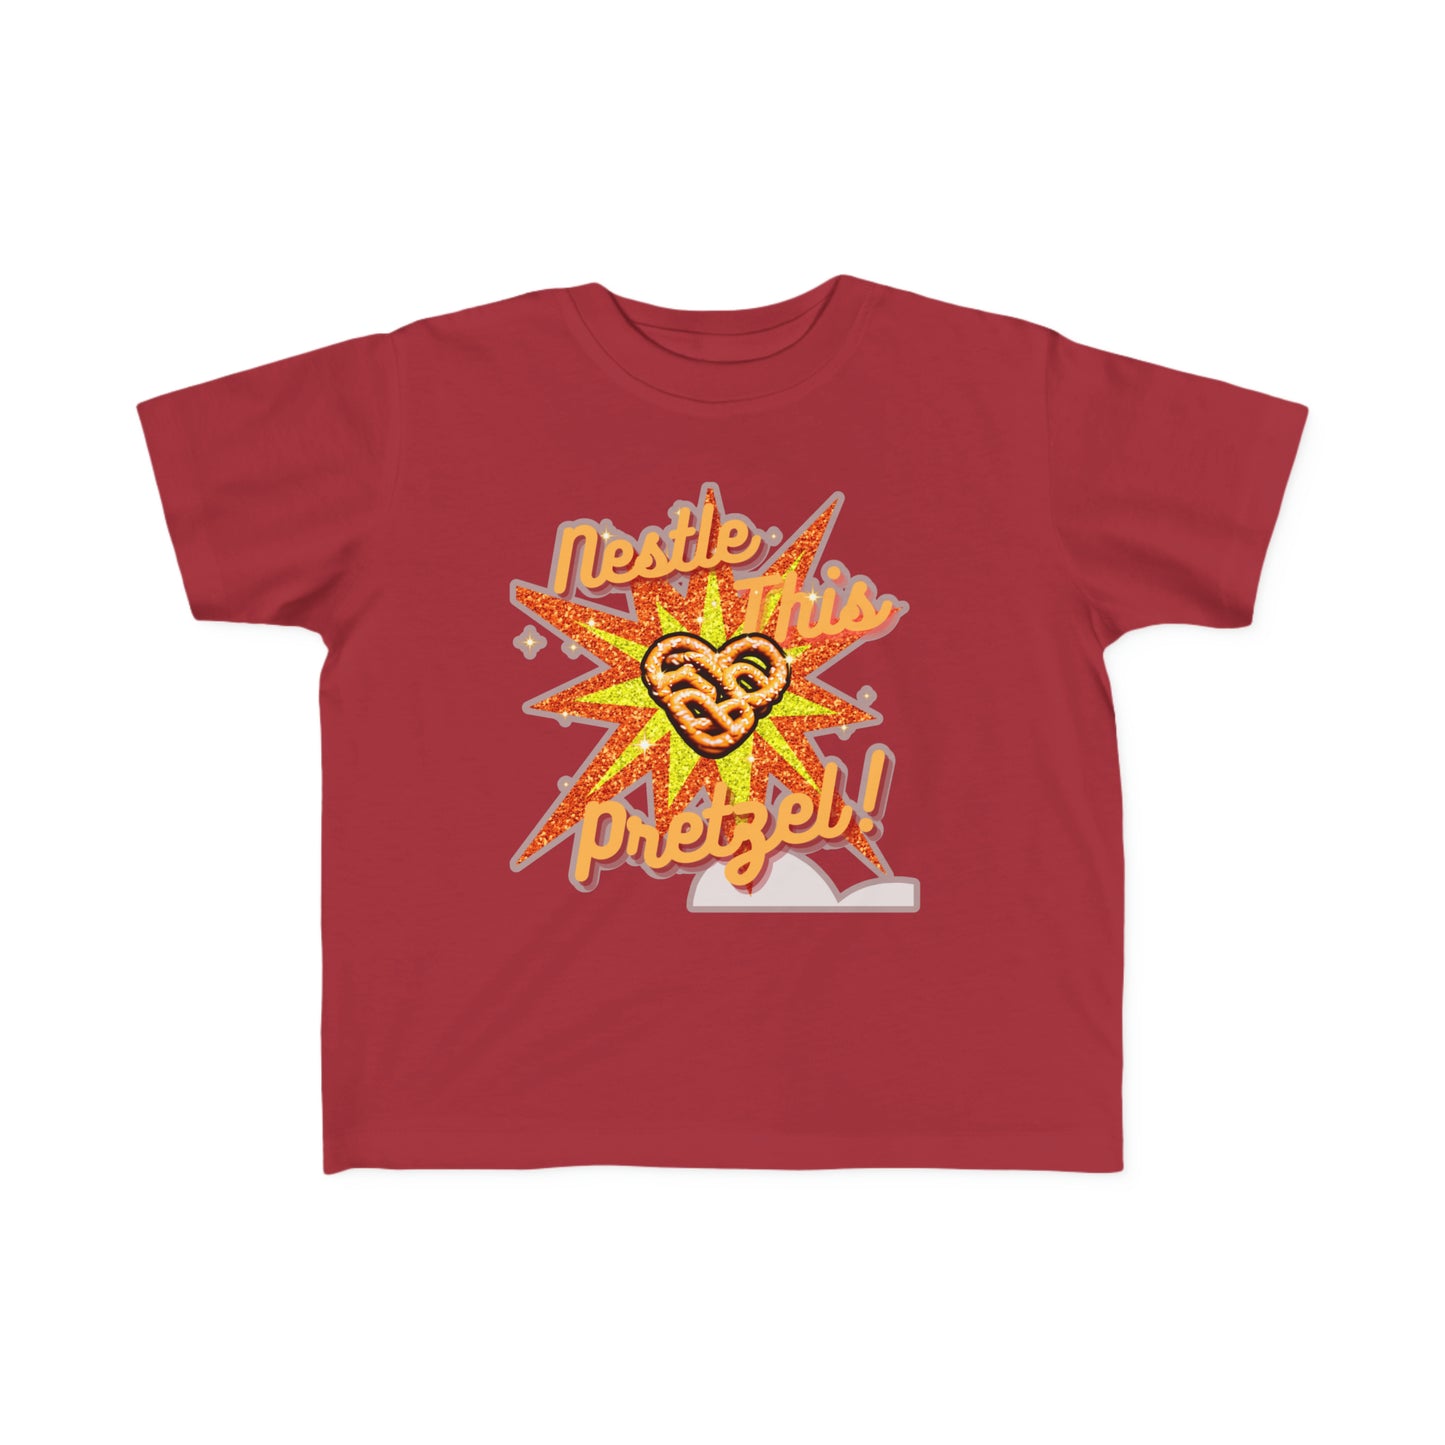 Toddler Salty Cravings Pretzel Tee Comfort Favorite Knot those Tiny Arms